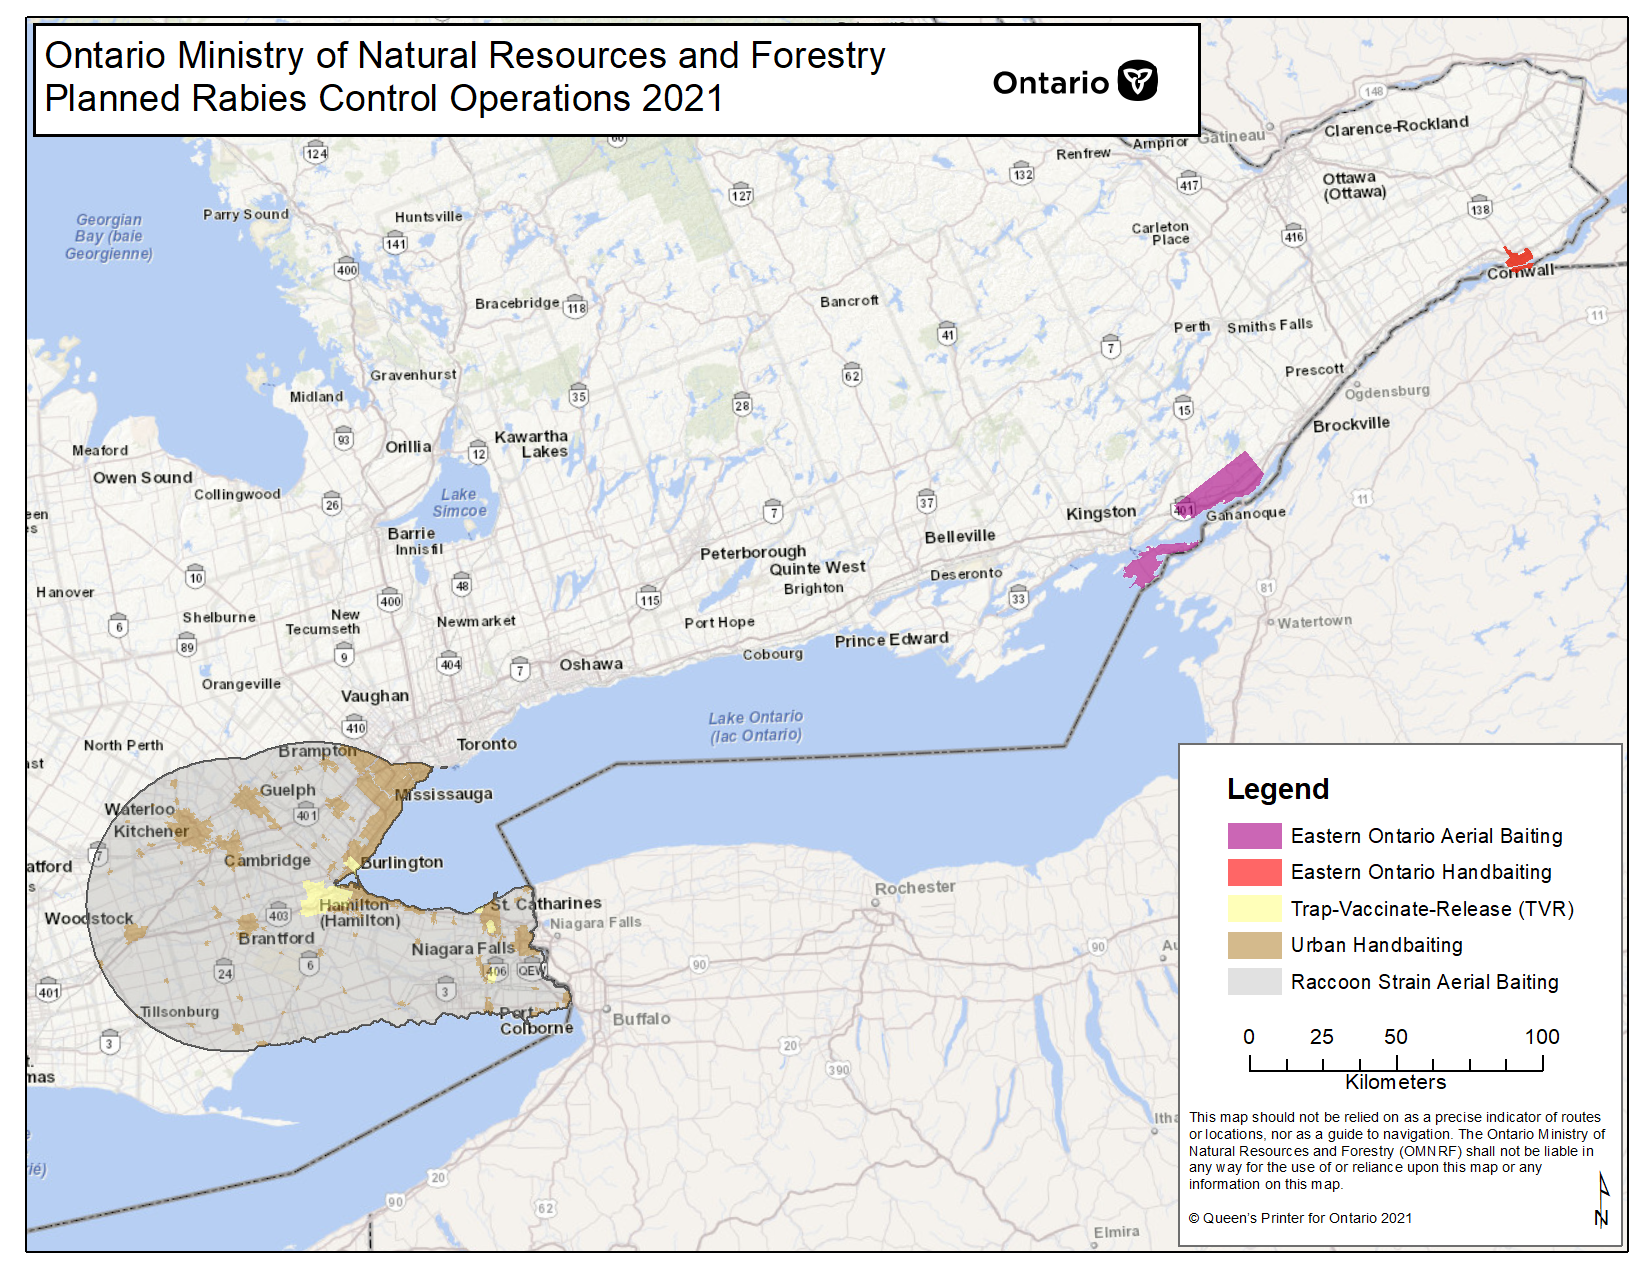 map of Ontario Ministry of Natural Resources and Forestry proposed rabies control operations 2021.